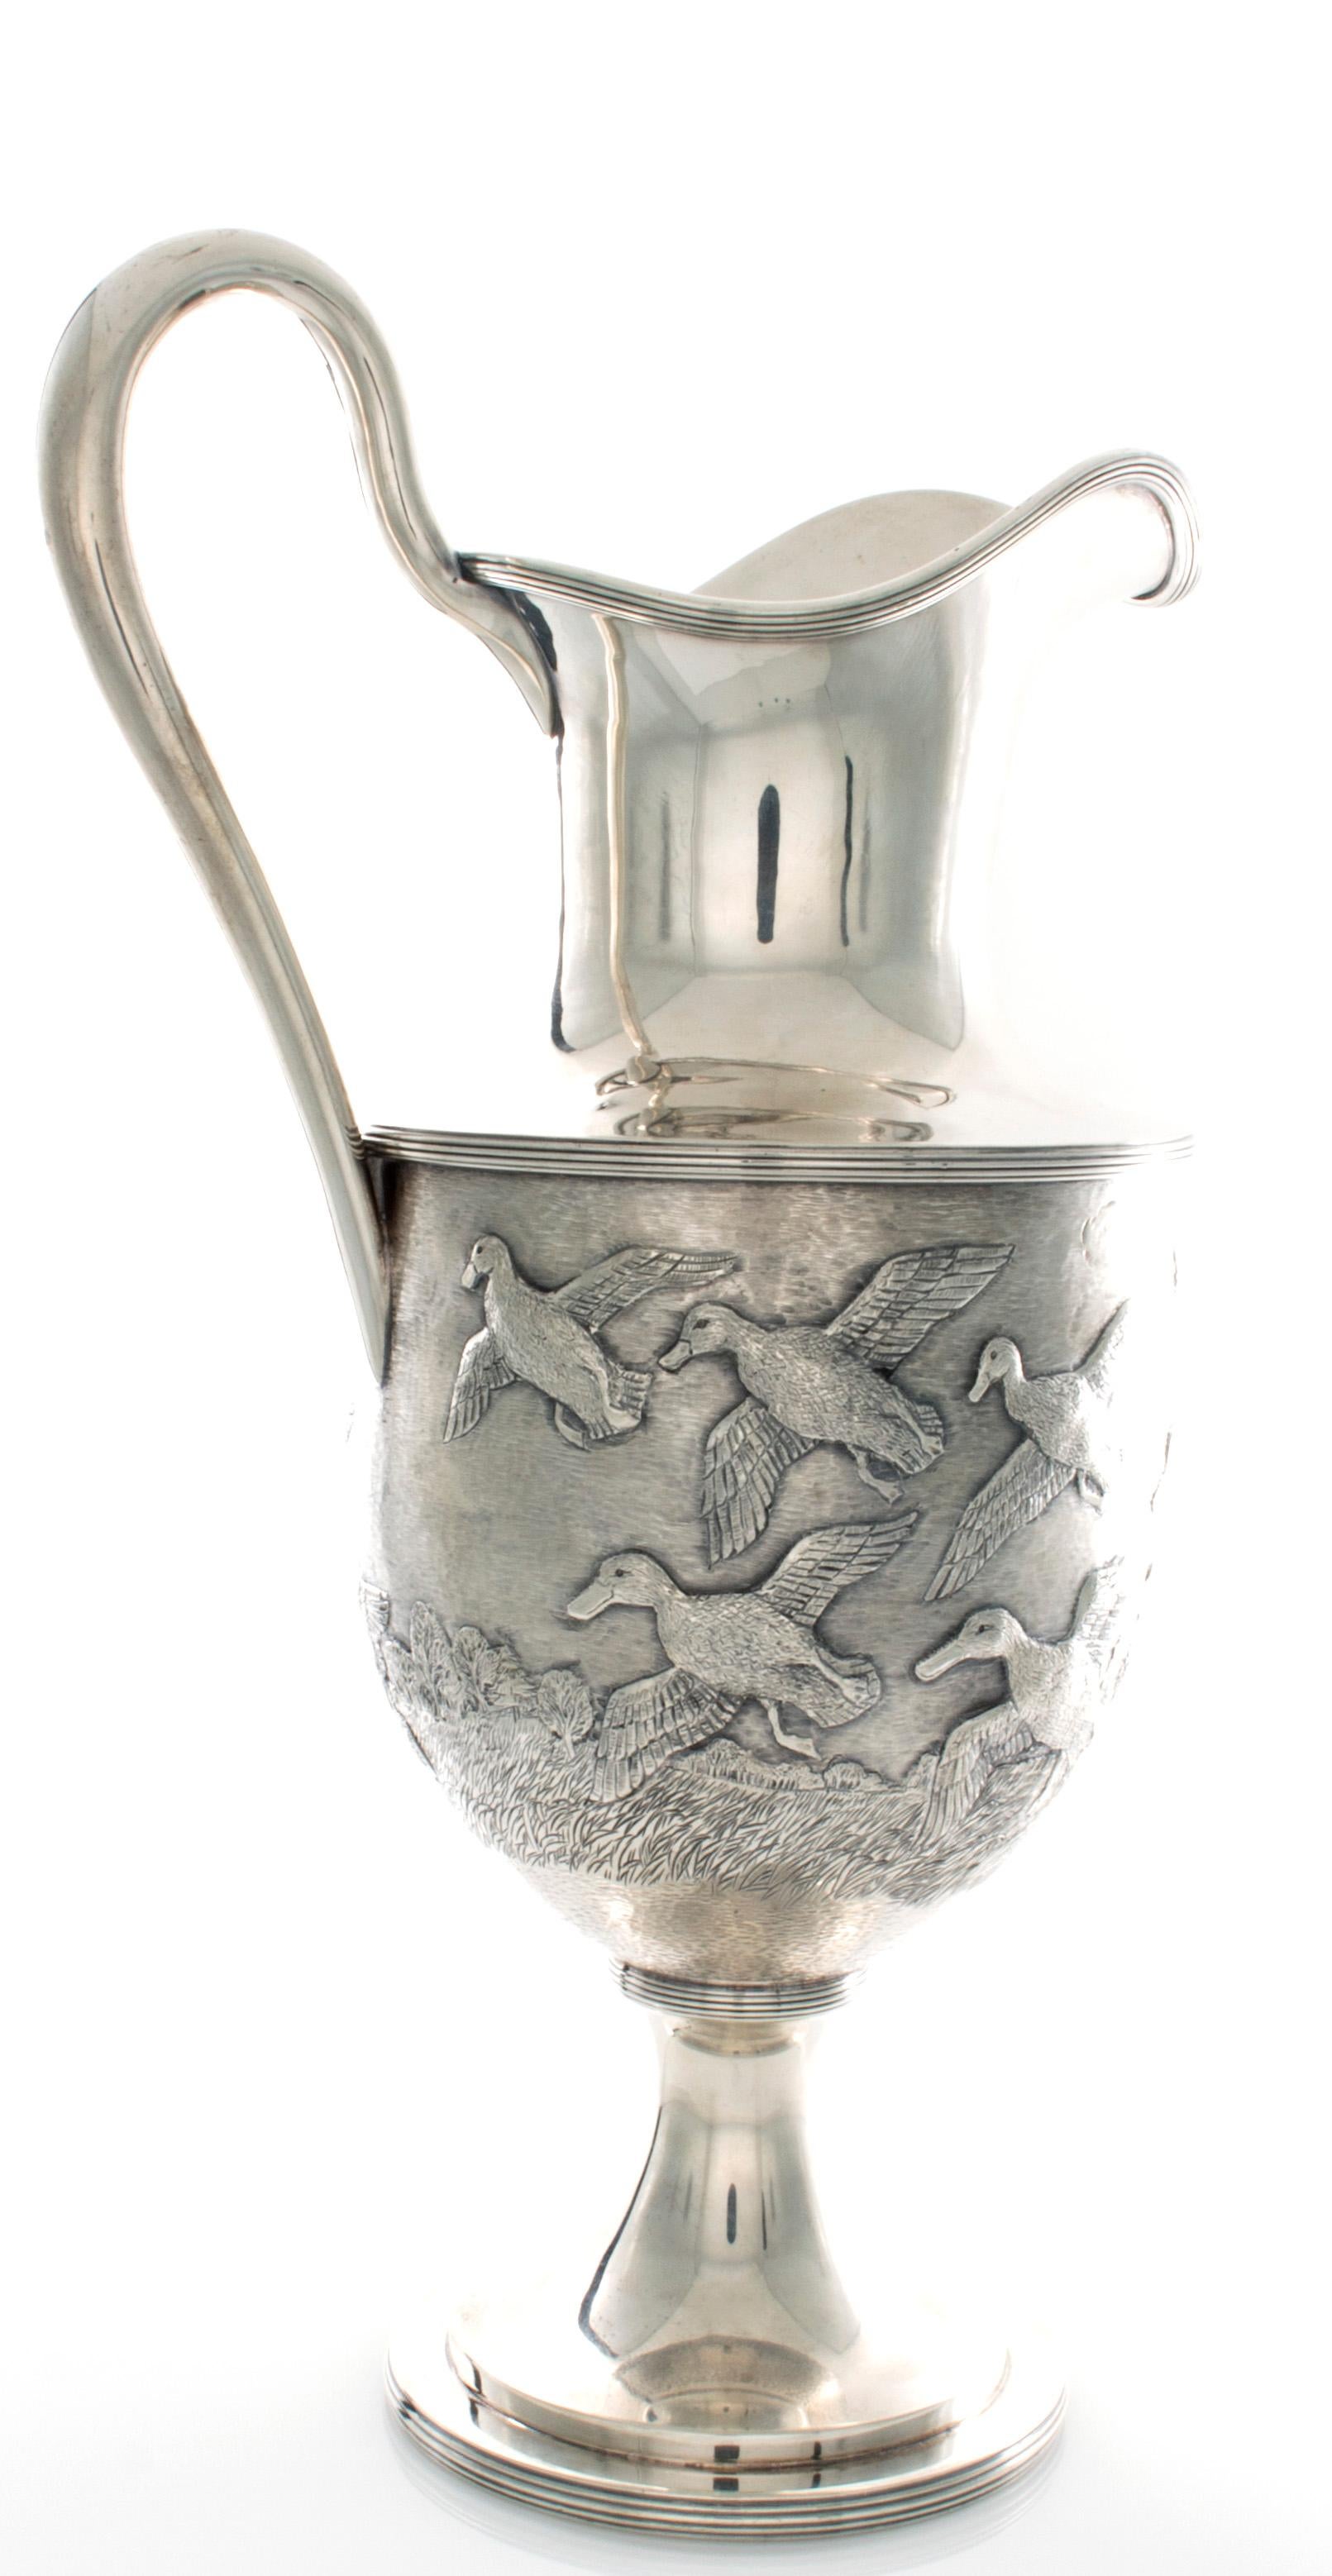 S.Kirk and Sons Handcrafted Sterling Pitcher or Ewer Very Rare (Art déco)